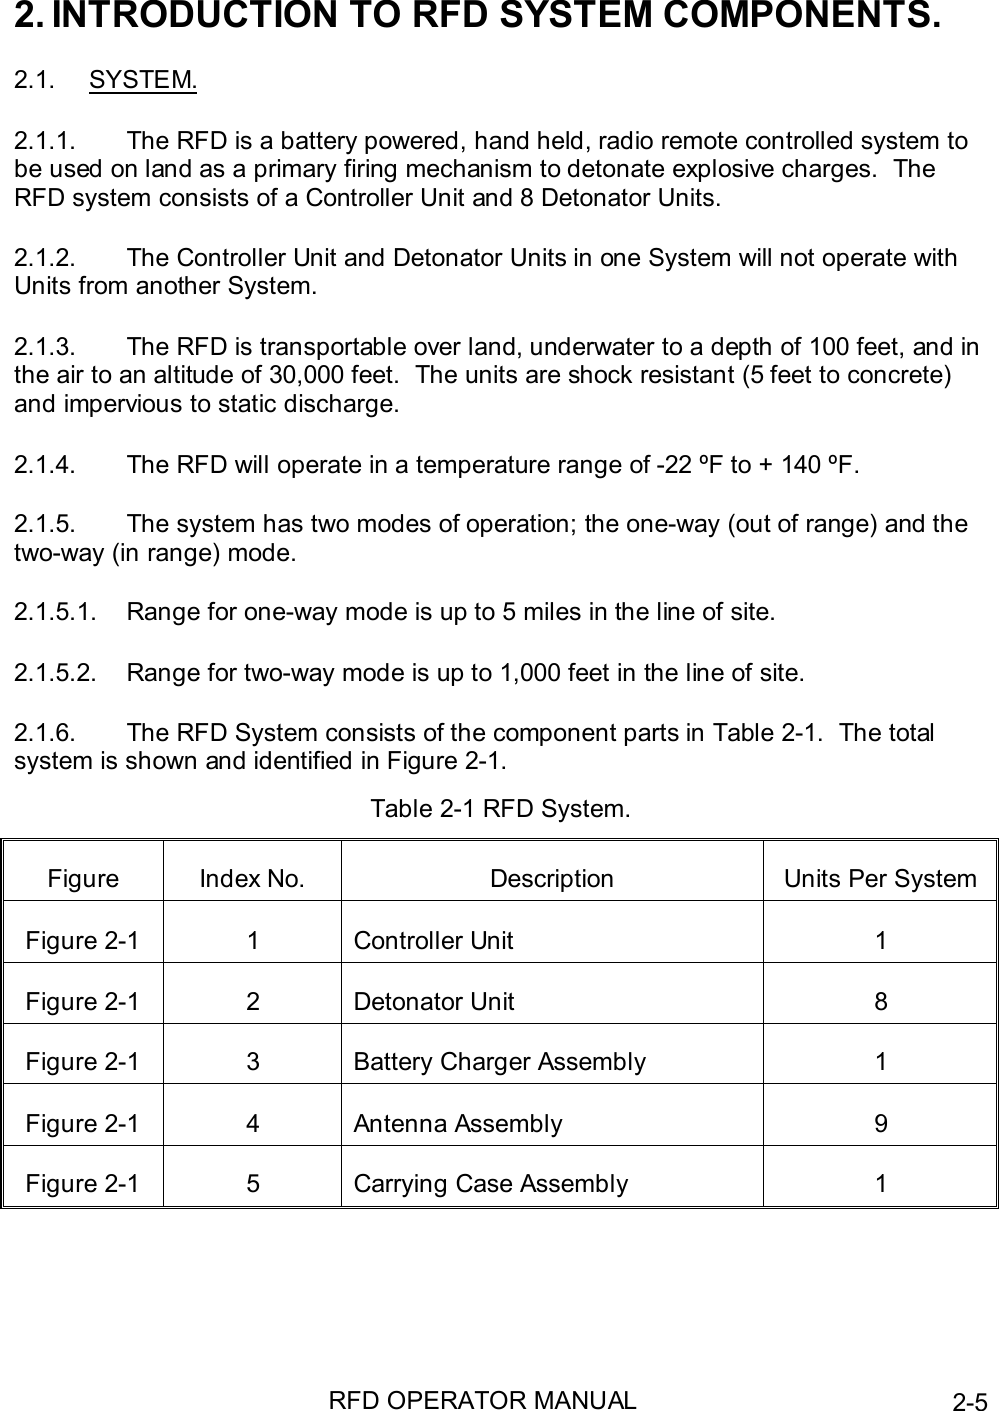 RFD OPERATOR MANUAL 2-52. INTRODUCTION TO RFD SYSTEM COMPONENTS.2.1. SYSTEM.2.1.1.  The RFD is a battery powered, hand held, radio remote controlled system tobe used on land as a primary firing mechanism to detonate explosive charges.  TheRFD system consists of a Controller Unit and 8 Detonator Units.2.1.2.  The Controller Unit and Detonator Units in one System will not operate withUnits from another System.2.1.3.  The RFD is transportable over land, underwater to a depth of 100 feet, and inthe air to an altitude of 30,000 feet.  The units are shock resistant (5 feet to concrete)and impervious to static discharge.2.1.4.  The RFD will operate in a temperature range of -22 ºF to + 140 ºF.2.1.5.  The system has two modes of operation; the one-way (out of range) and thetwo-way (in range) mode.2.1.5.1.  Range for one-way mode is up to 5 miles in the line of site.2.1.5.2.  Range for two-way mode is up to 1,000 feet in the line of site.2.1.6.  The RFD System consists of the component parts in Table 2-1.  The totalsystem is shown and identified in Figure 2-1.Table 2-1 RFD System.Figure Index No. Description Units Per SystemFigure 2-1 1 Controller Unit 1Figure 2-1 2 Detonator Unit 8Figure 2-1 3 Battery Charger Assembly 1Figure 2-1 4 Antenna Assembly 9Figure 2-1 5 Carrying Case Assembly 1